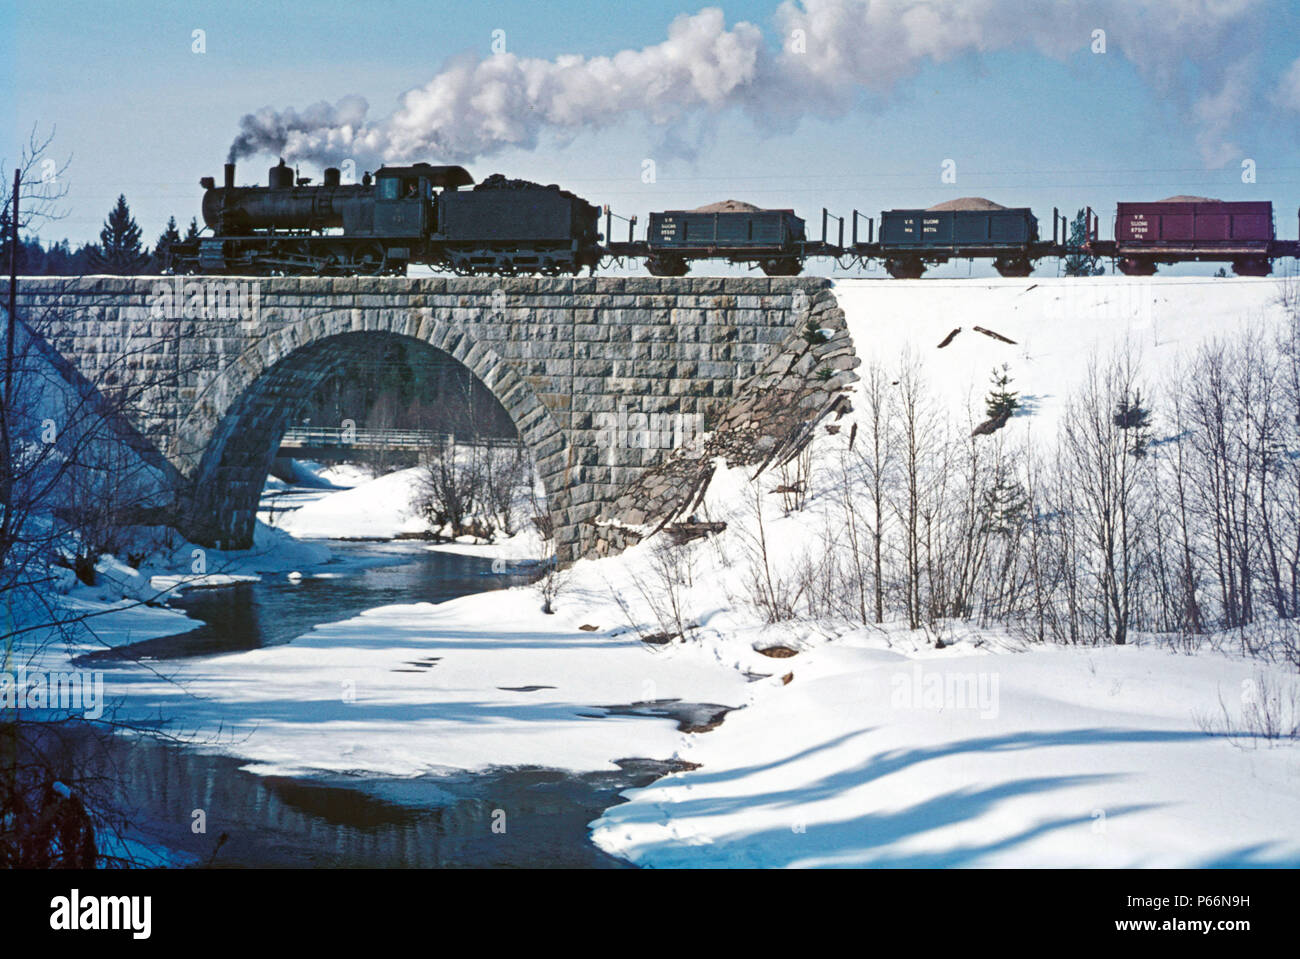 Finland's frozen rivers begin to flow again as springtime advances. Here at Hyrynsalmi, Finnish Railway's TV1 Class 2-8-0 No.921 heads a train enginee Stock Photo